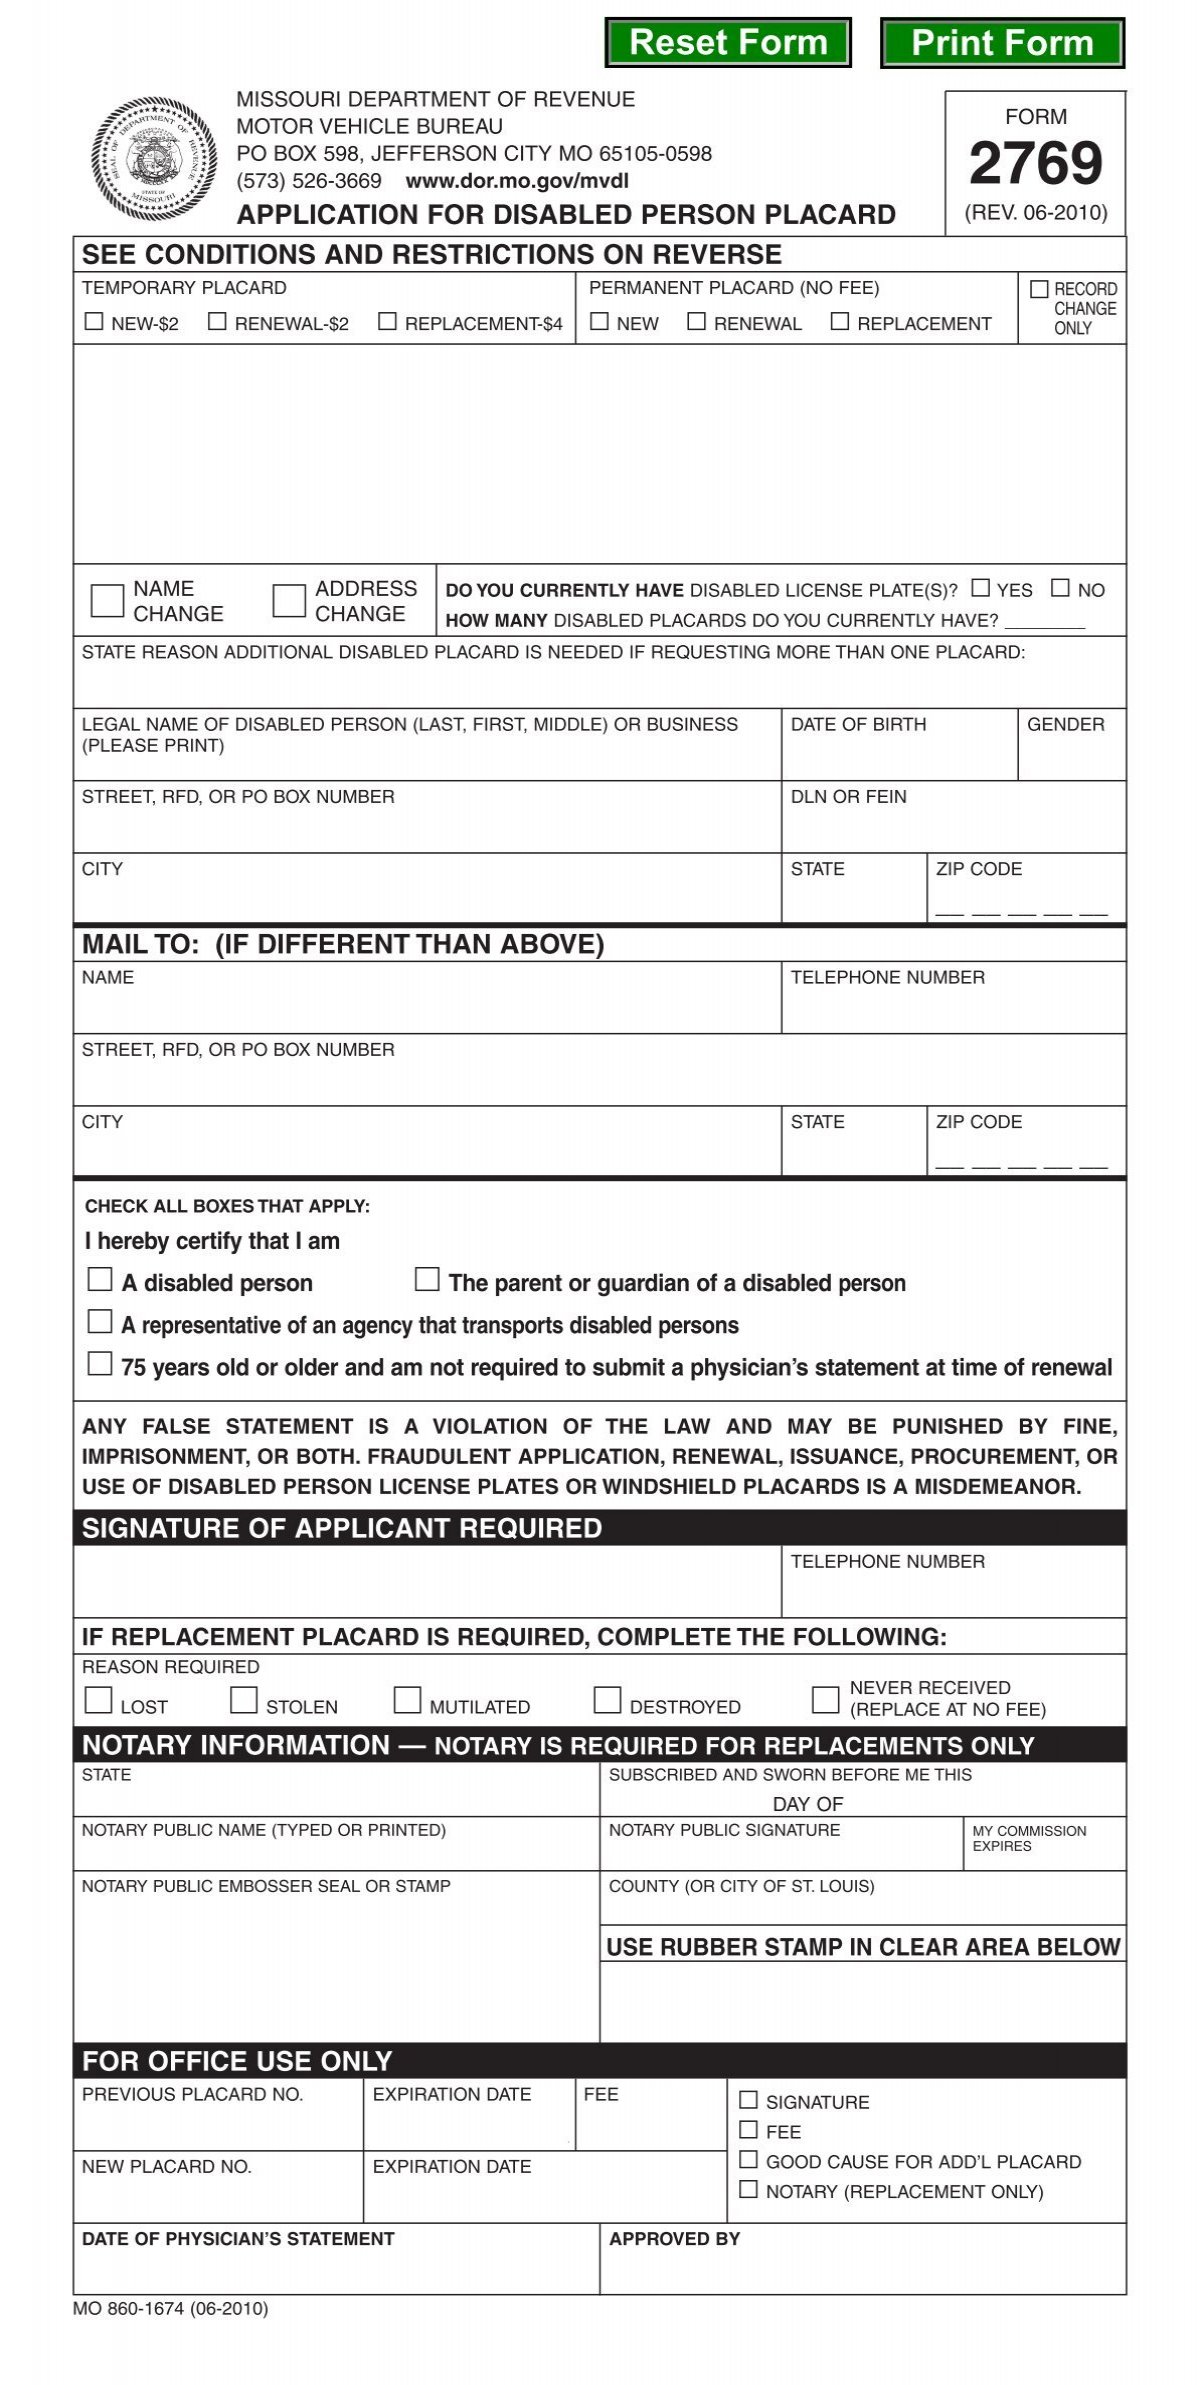 application-for-disabled-person-placard-form-2769-missouri